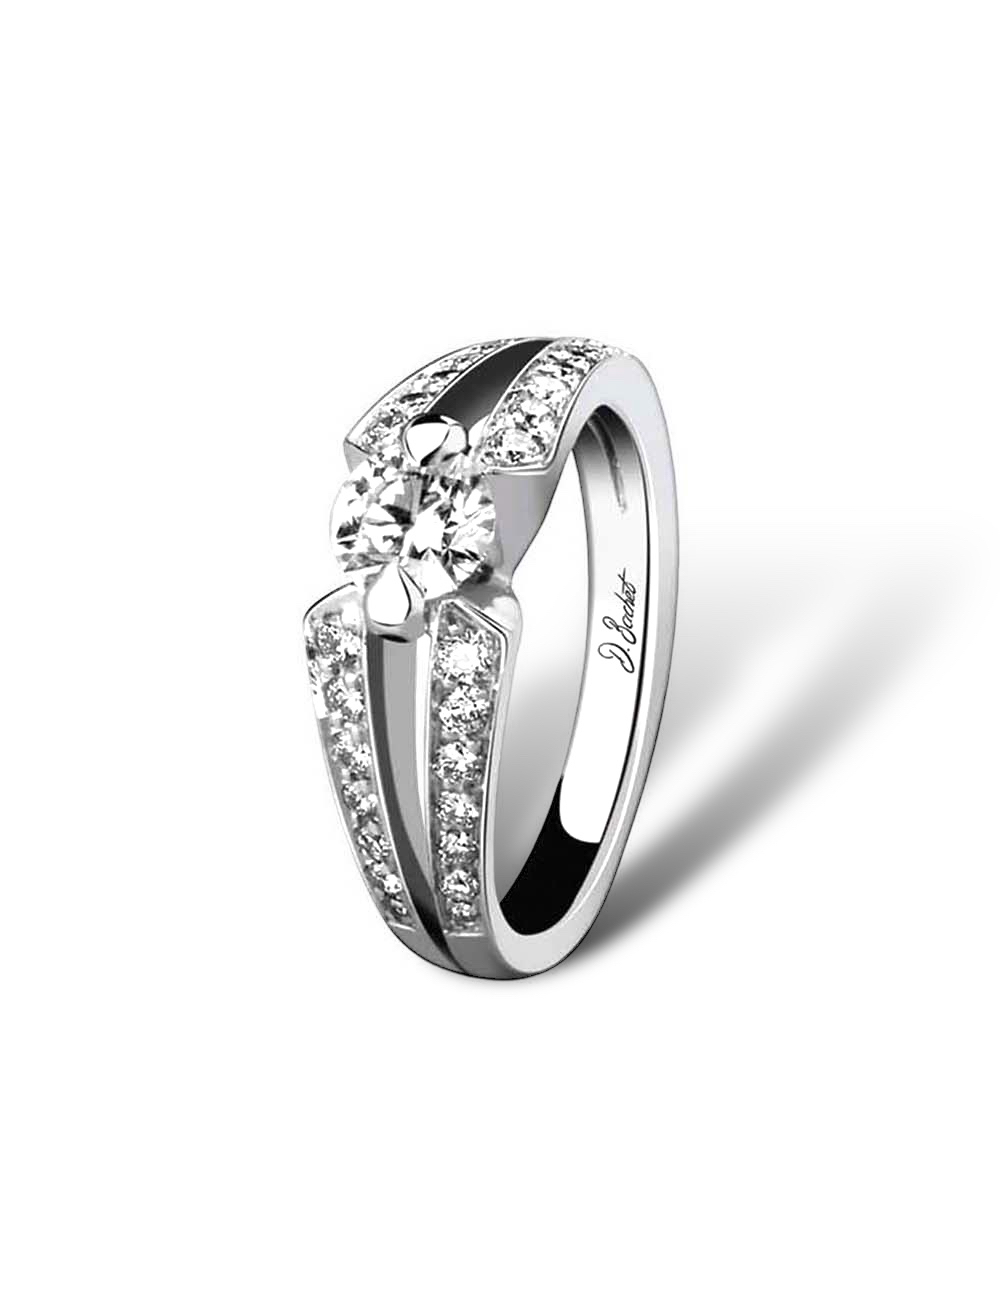 Platinum solitaire engagement ring, 0.50ct center white diamond, paved setting for timeless sparkle.